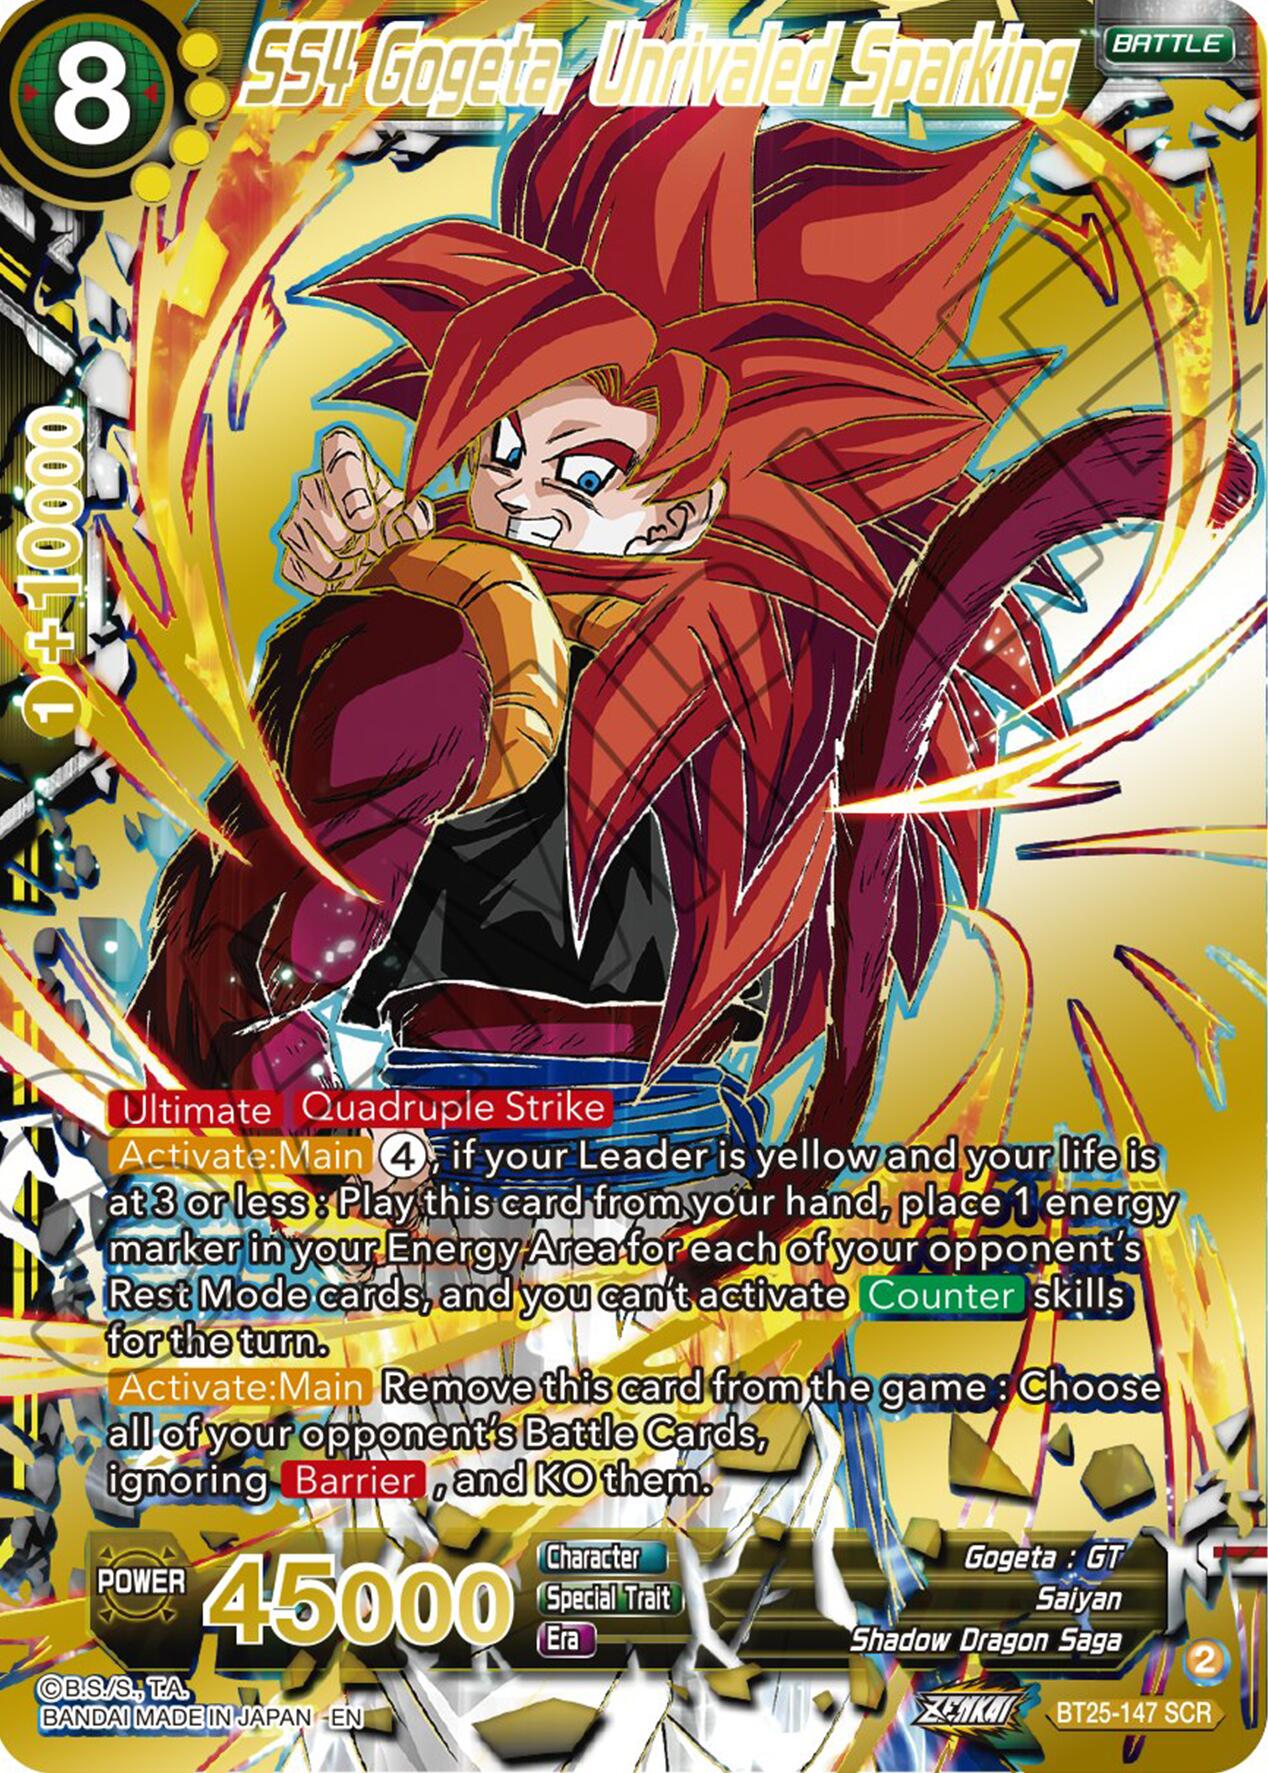 SS4 Gogeta, Unrivaled Sparking (BT25-147) [Legend of the Dragon Balls] | North Valley Games